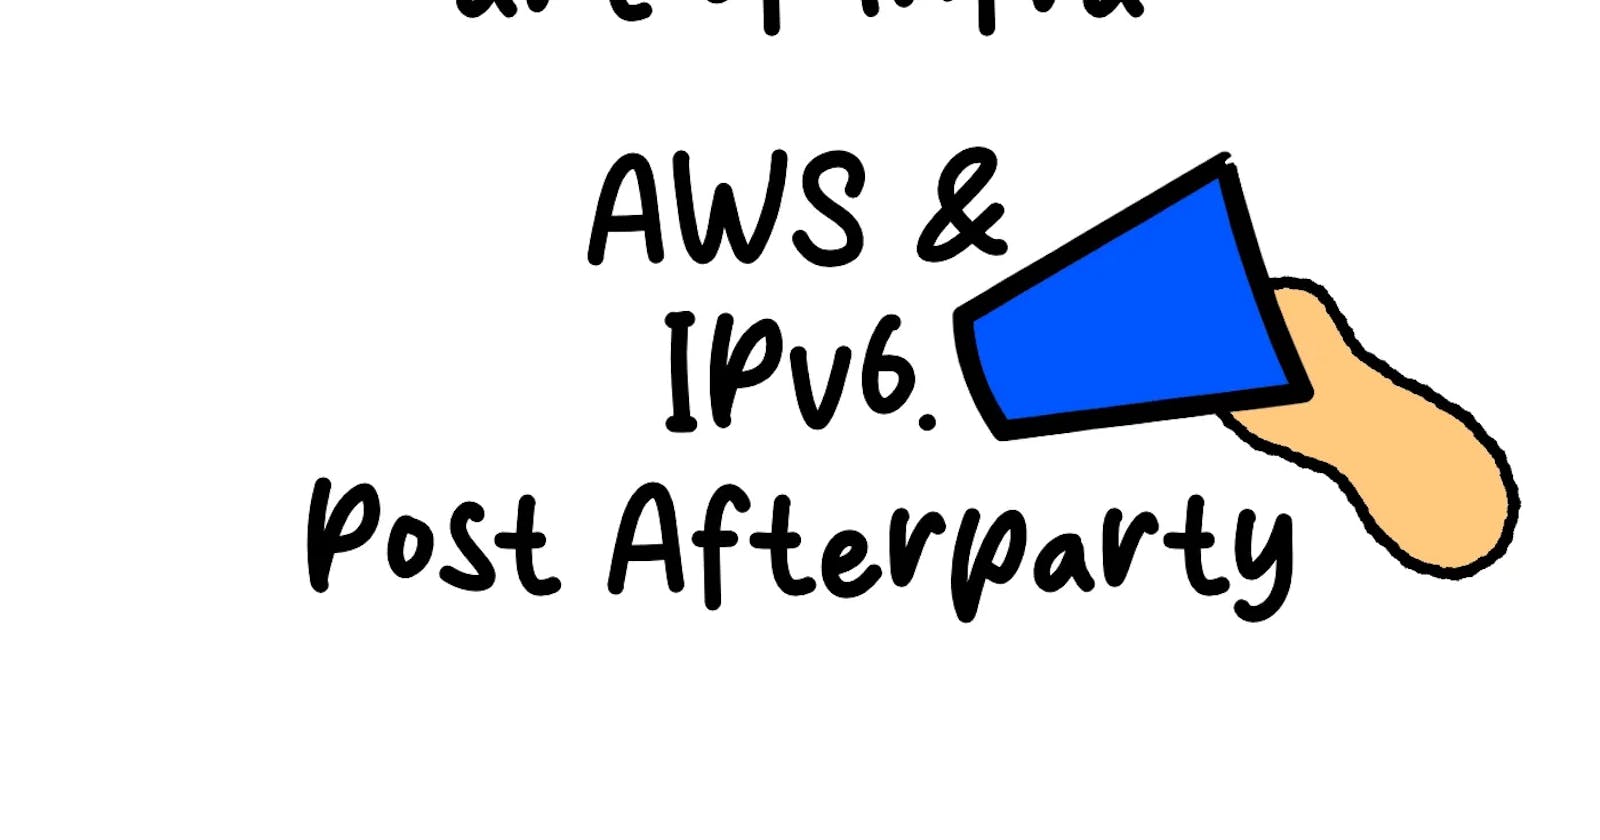 AWS & IPv6 - Post Afterparty